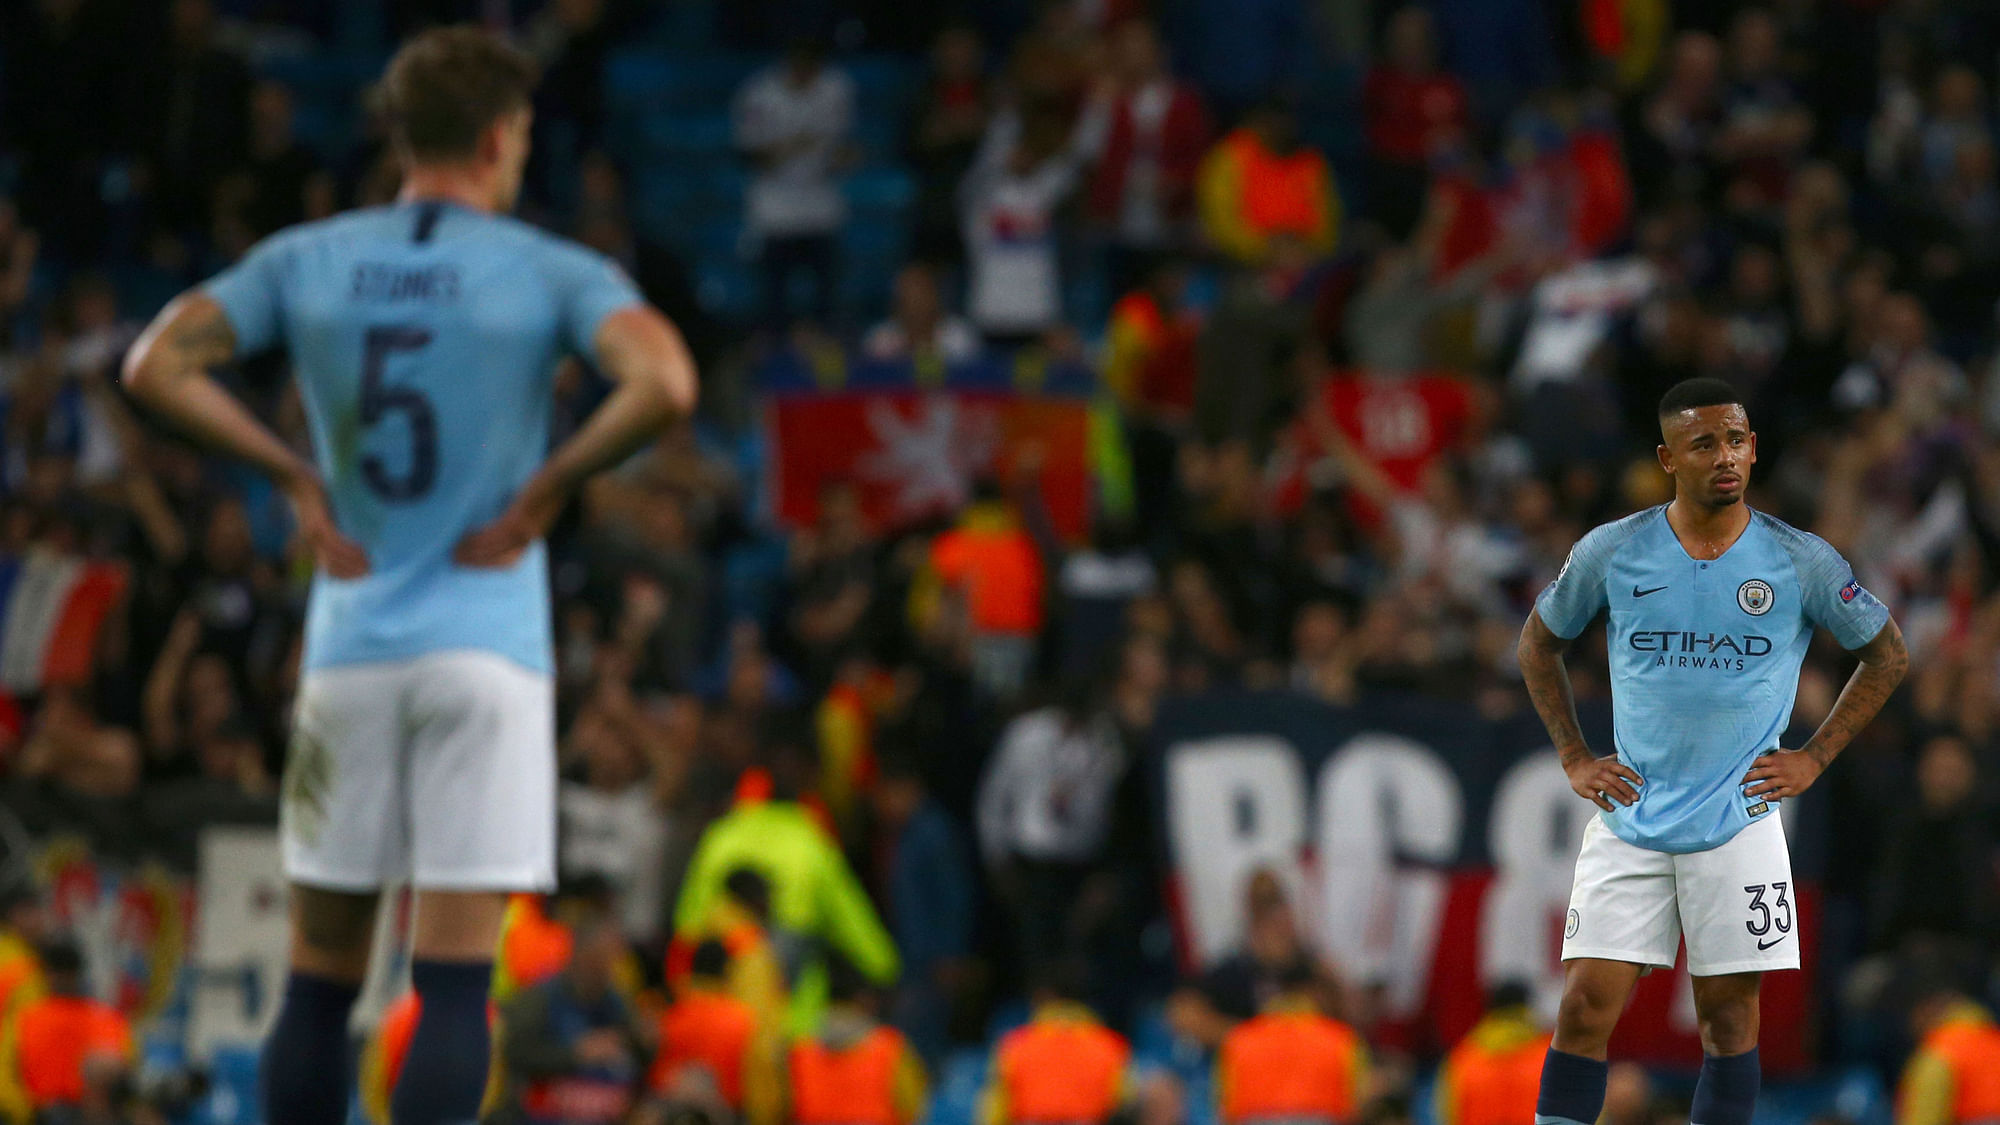 Manchester City’s Gabriel Jesus, right, and Manchester City’s John Stones, left, stand with their hands on their hips after Lyon score their second goal during the Champions League Group F soccer match.